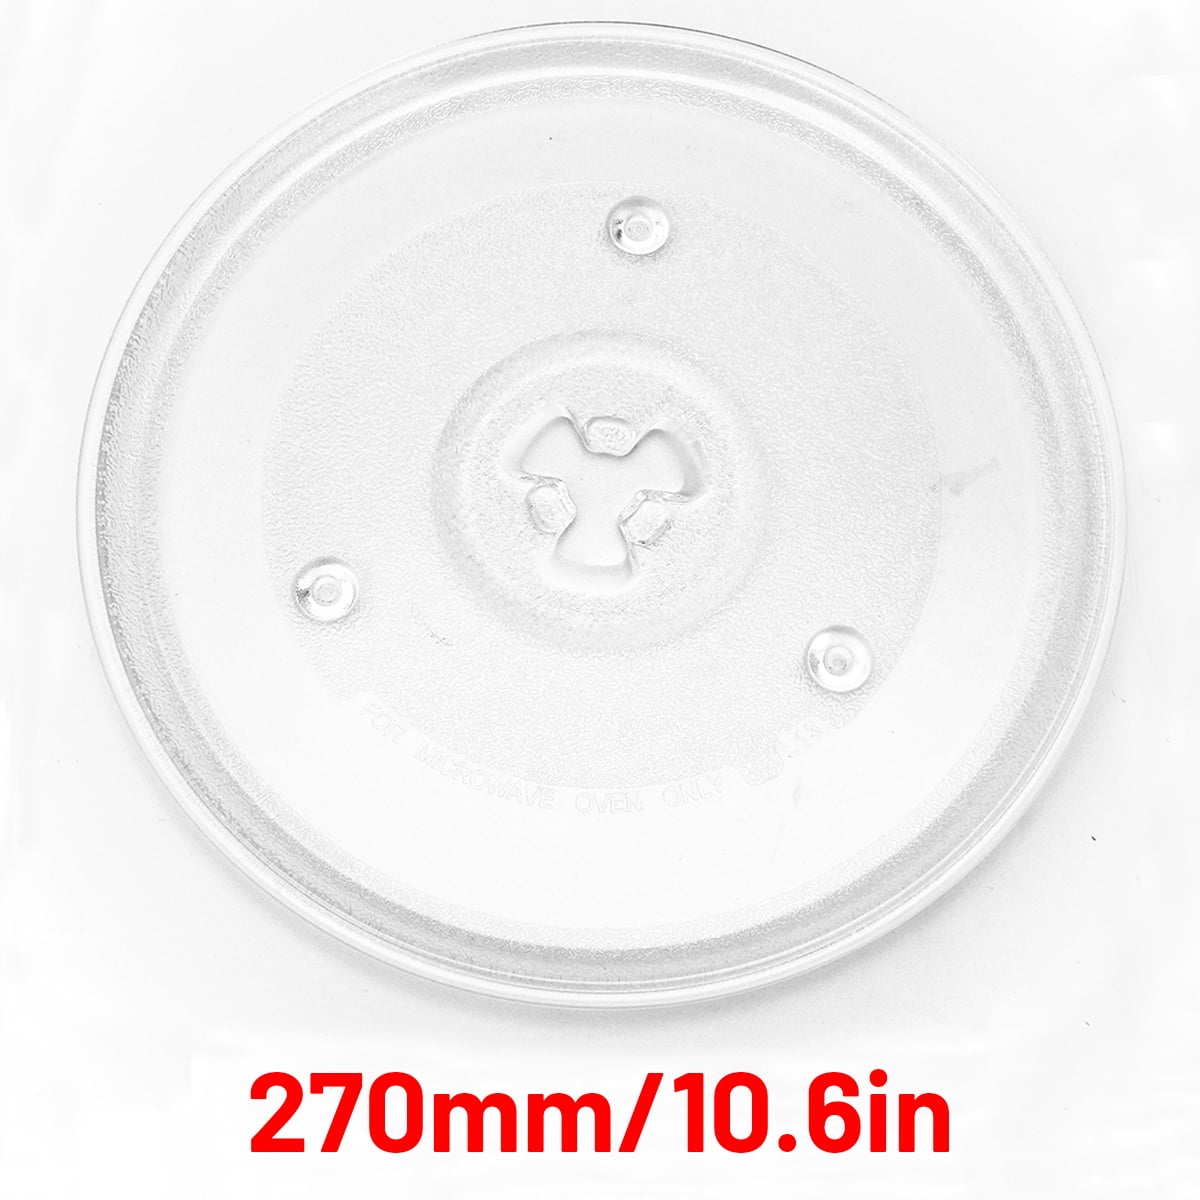 New Replacement Microwave Oven Glass Turntable 10.6" 27cm 270mm 